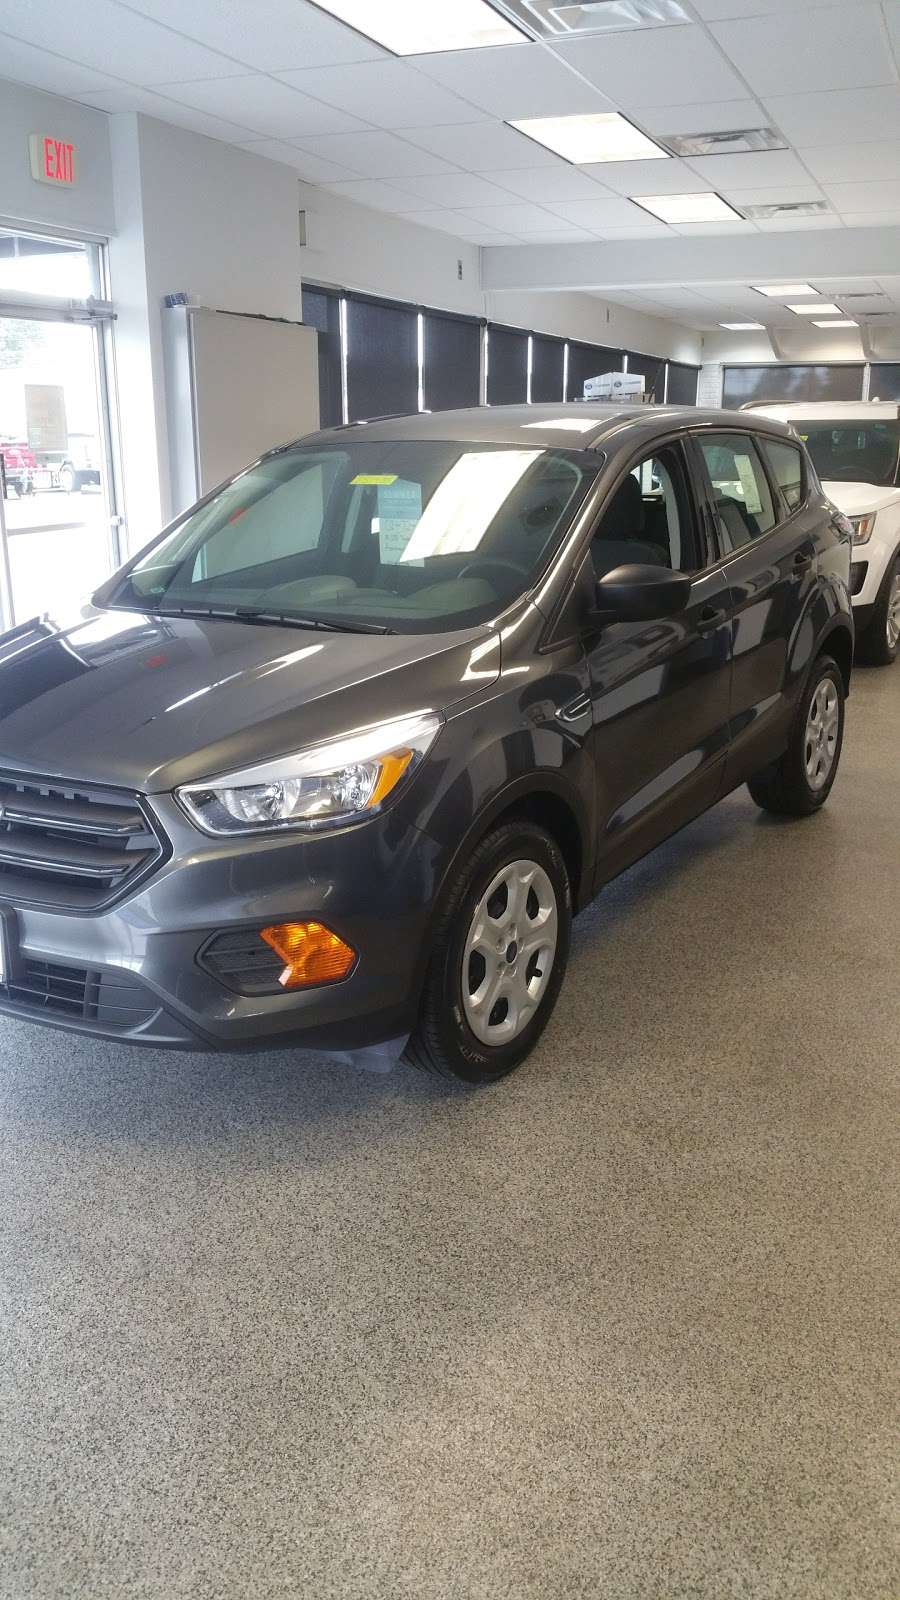 Bayshore Ford | 200 S Broadway, Pennsville, NJ 08070 | Phone: (856) 678-3111